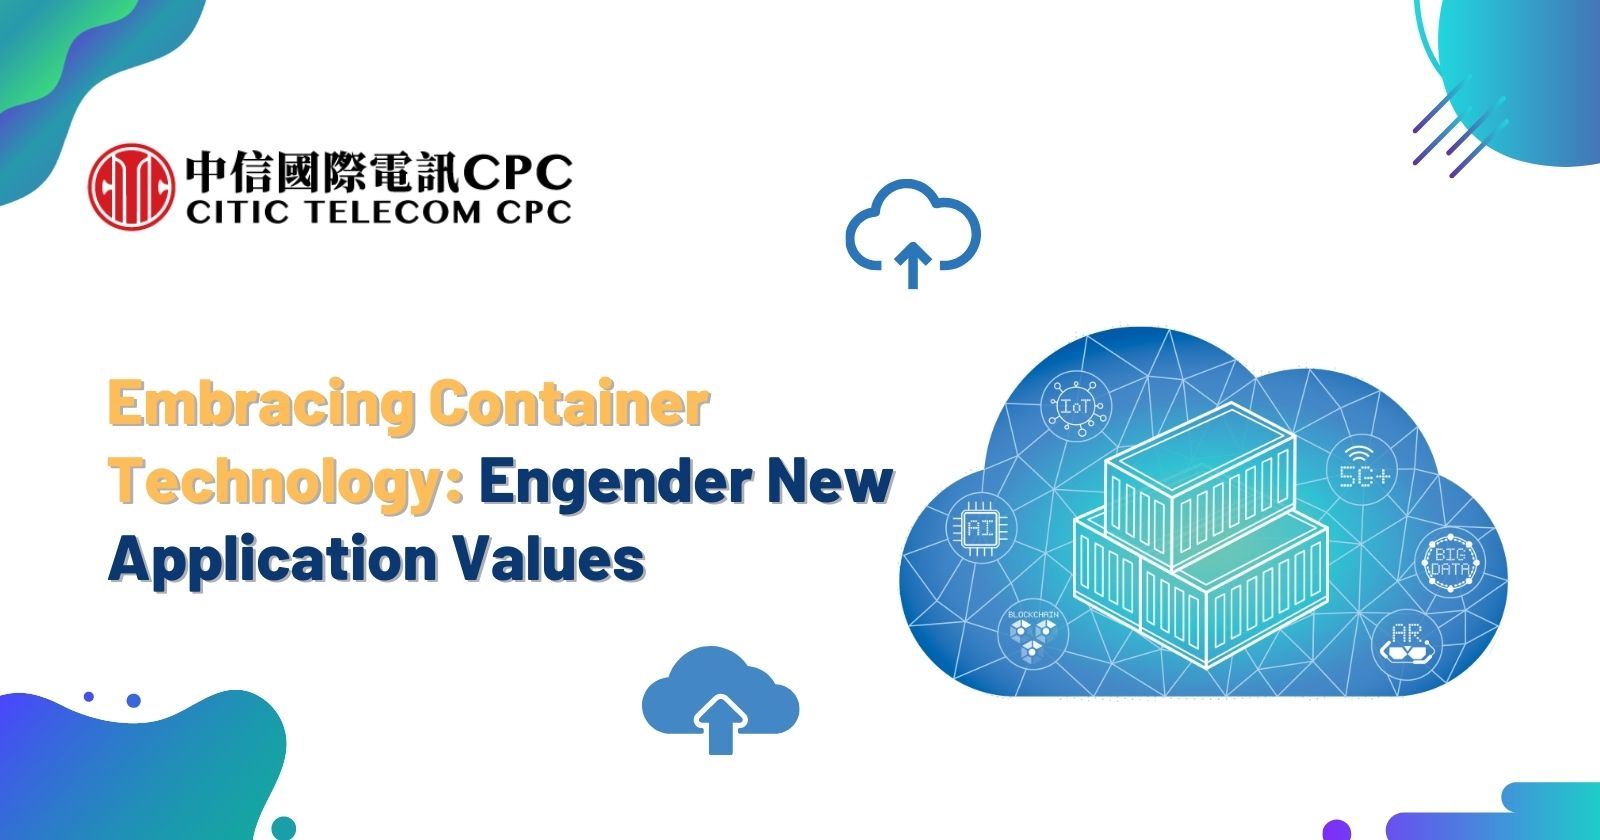 Embracing Container Technology: Engender New Application Values